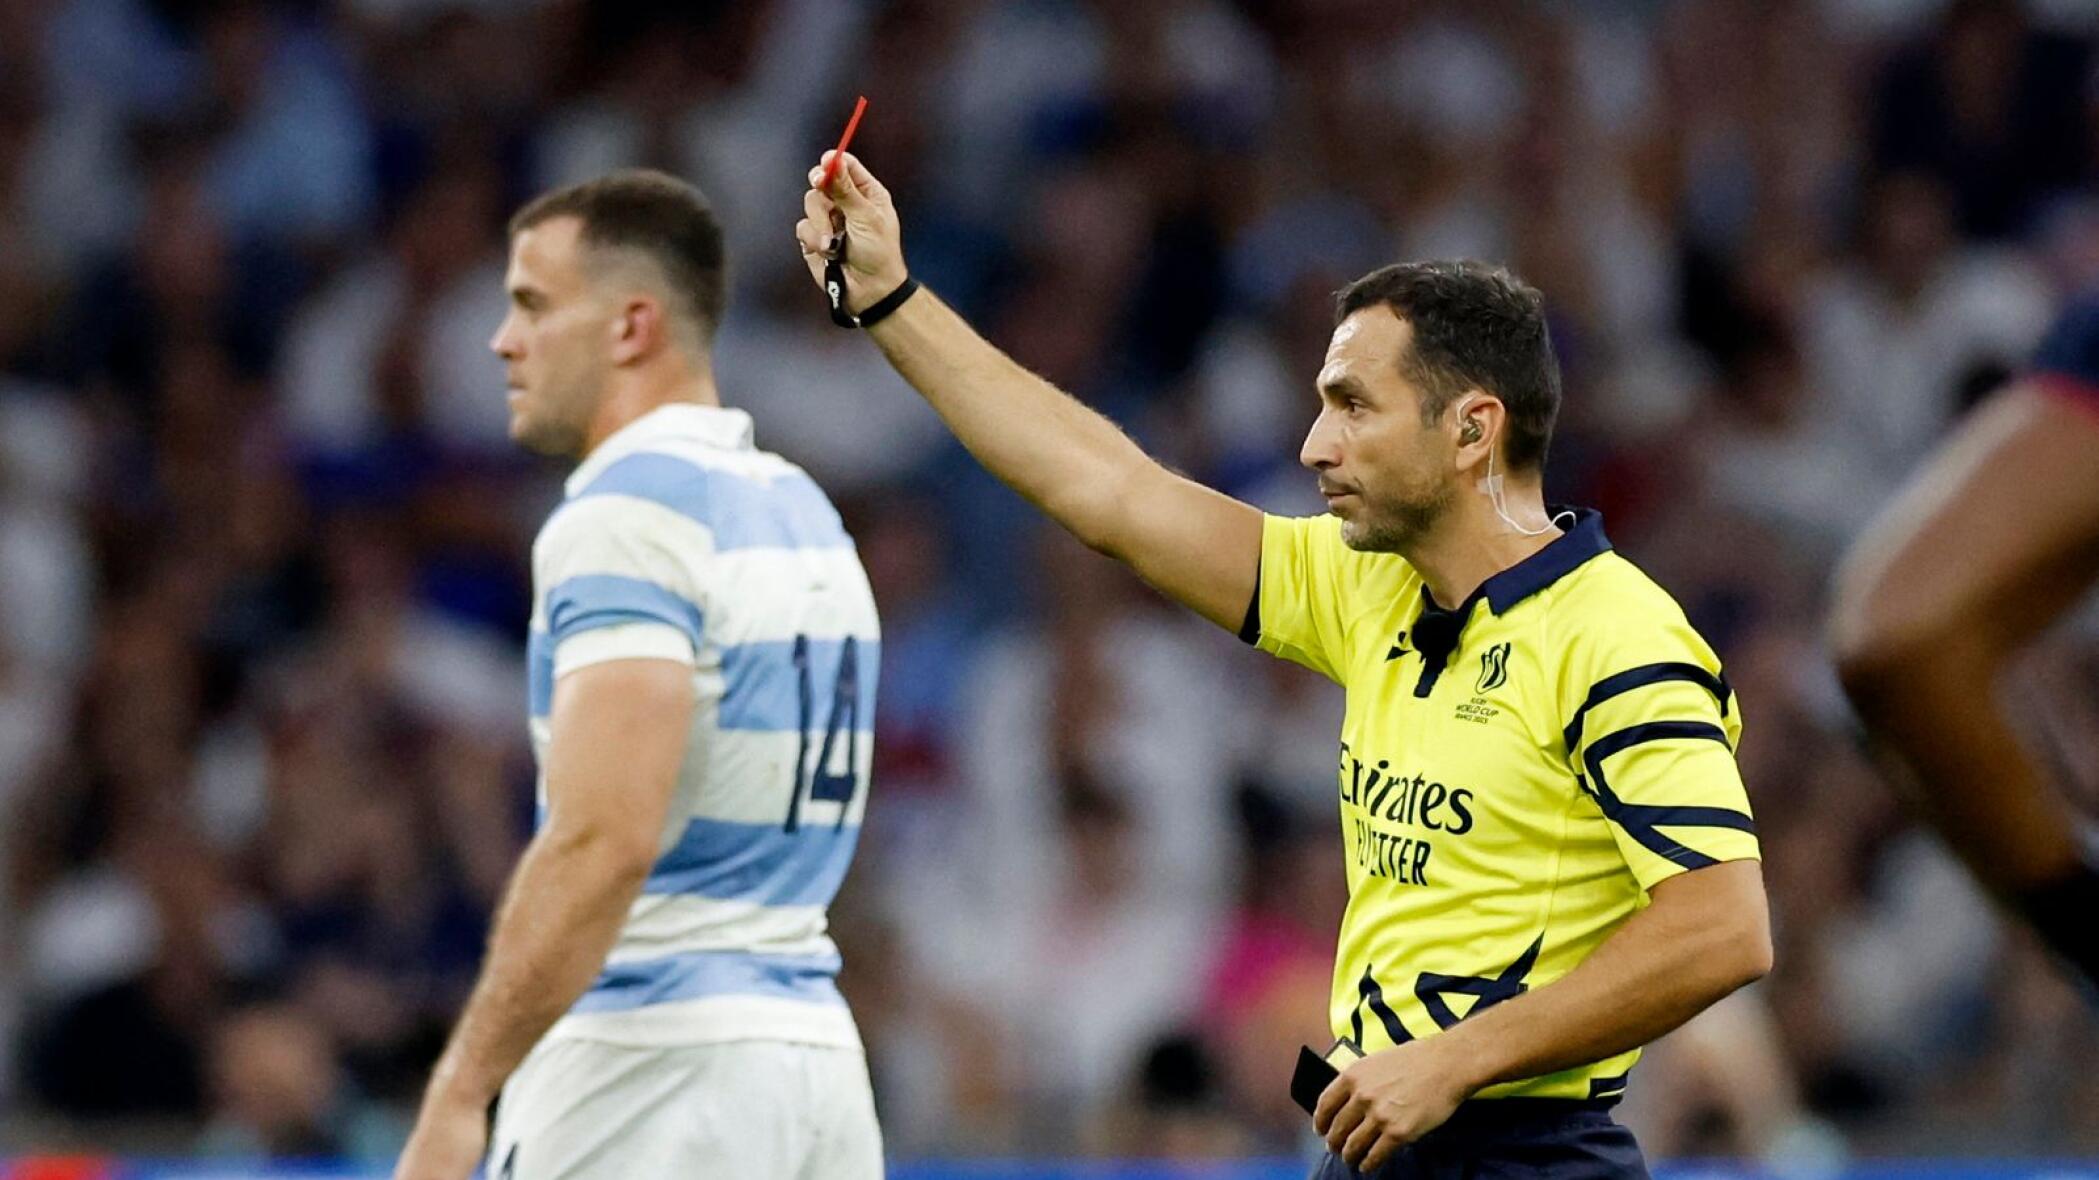 Referee Mathieu Raynal shows a red card to England's Tom Curry after a TMO review during the Rugby World Cup match between England and Argentina in Marseille